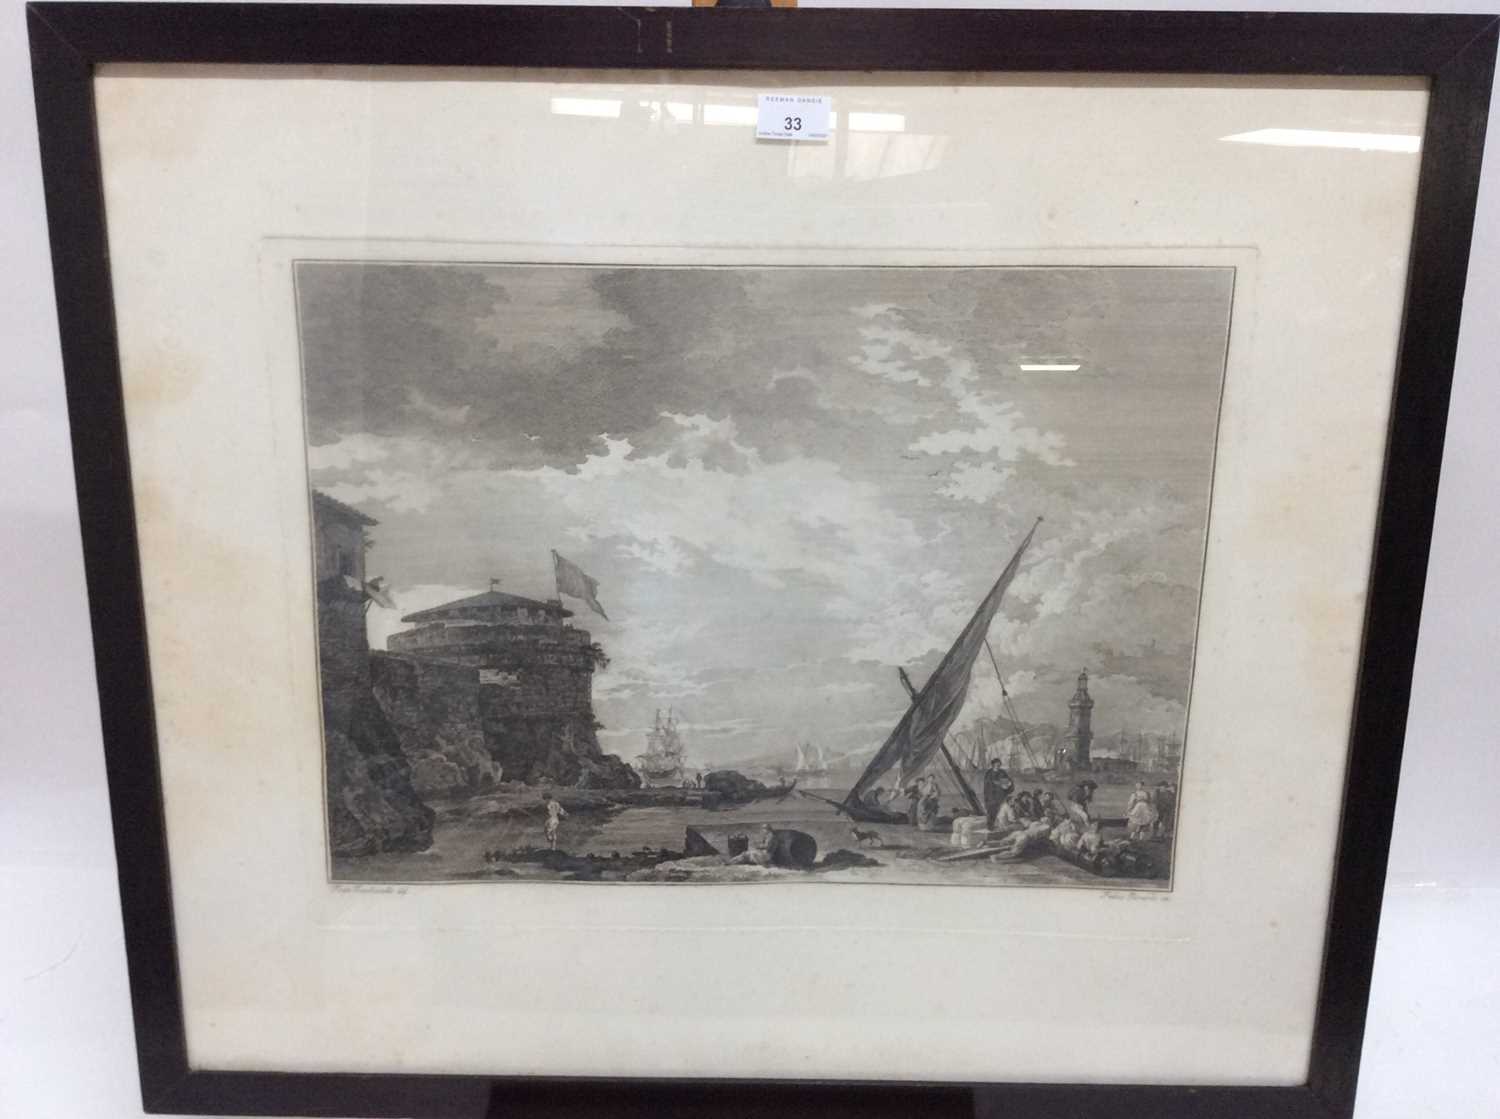 Lot 33 - Pair of antique black and white engravings after Fran. Zuccherelli by Fabio Berardi, figures and vessels off the coast, in glazed ebonised frames, plate size 40cm x 53cm, overall size 65cm x 75cm